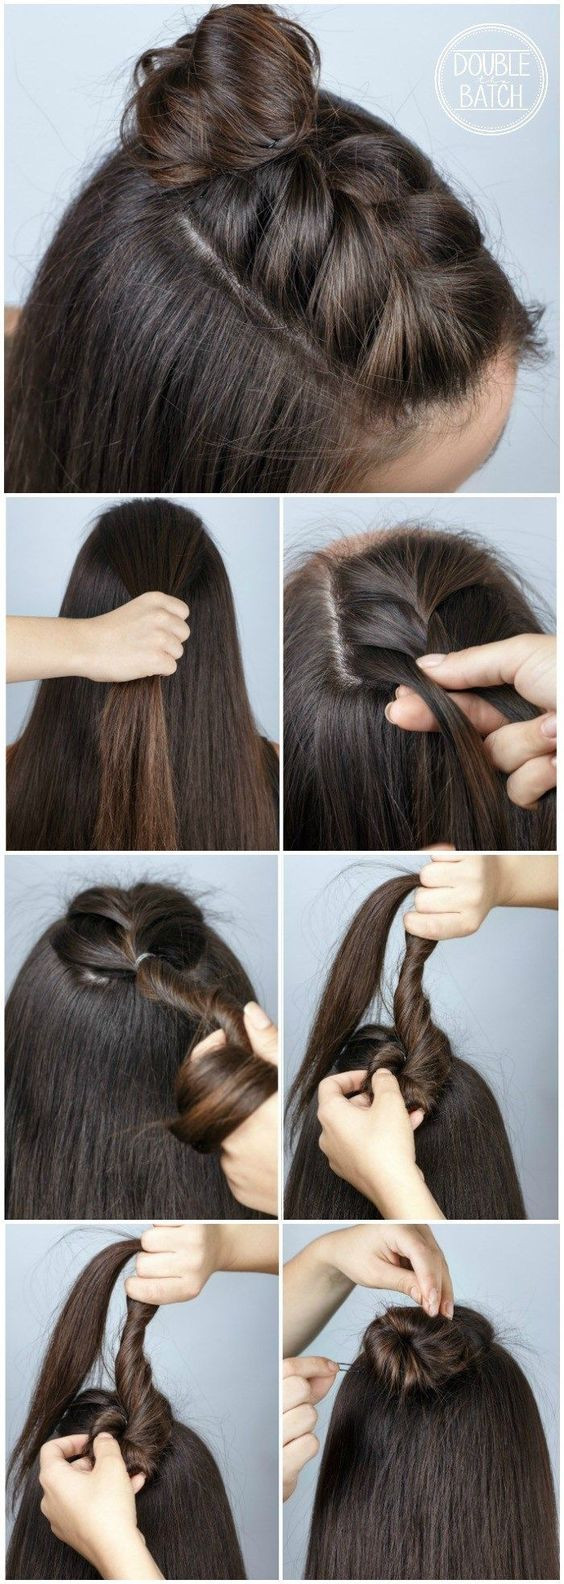 Easy Hairstyles To Do Yourself
 22 Quick and Easy Back to School Hairstyle Tutorials